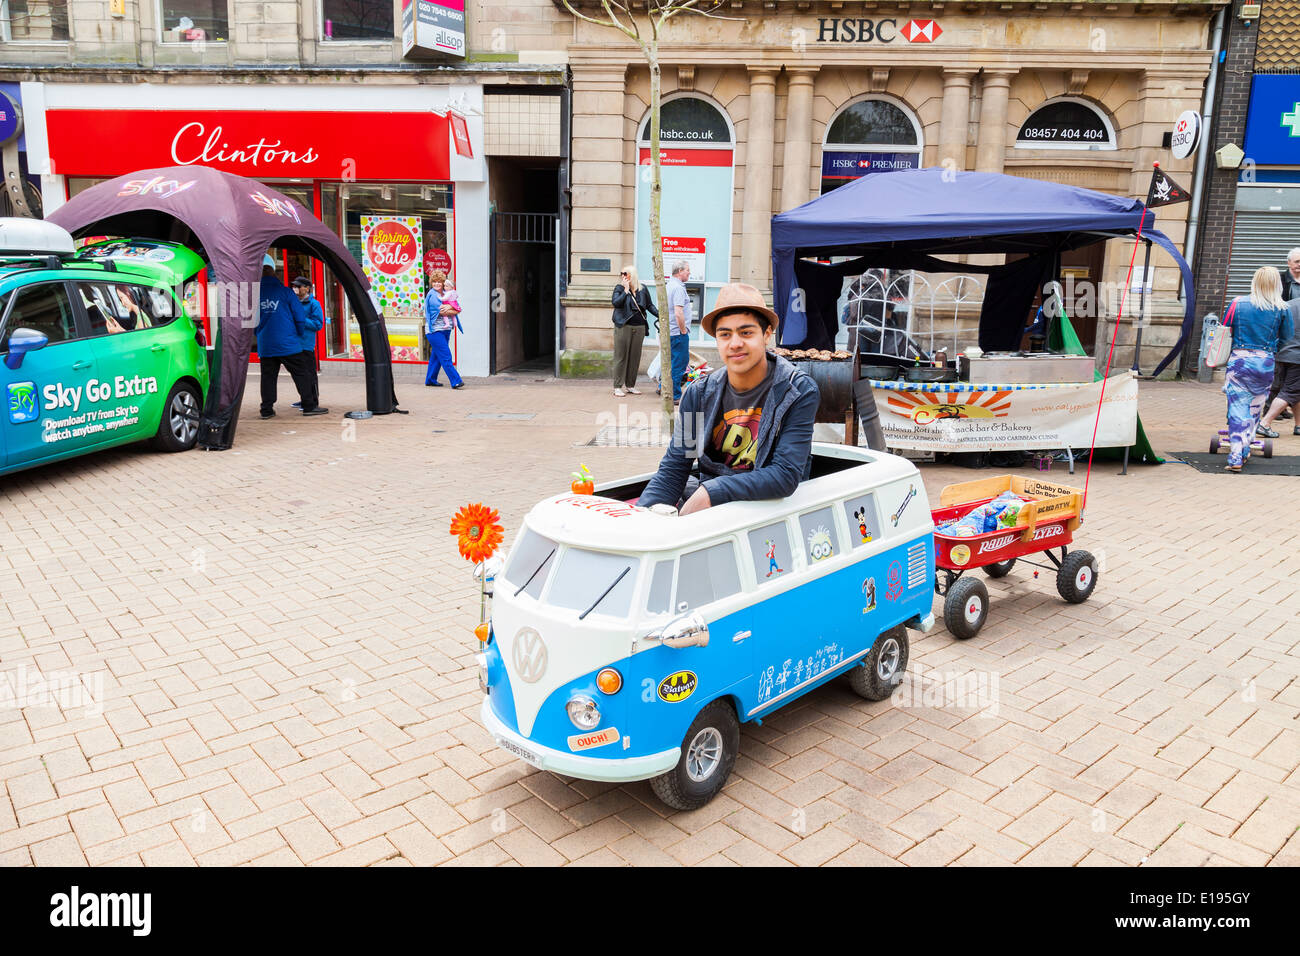 Young Man, driving a miniature Volkswagen car, with red open trailer, Newcastle Under Lyme, England Stock Photo